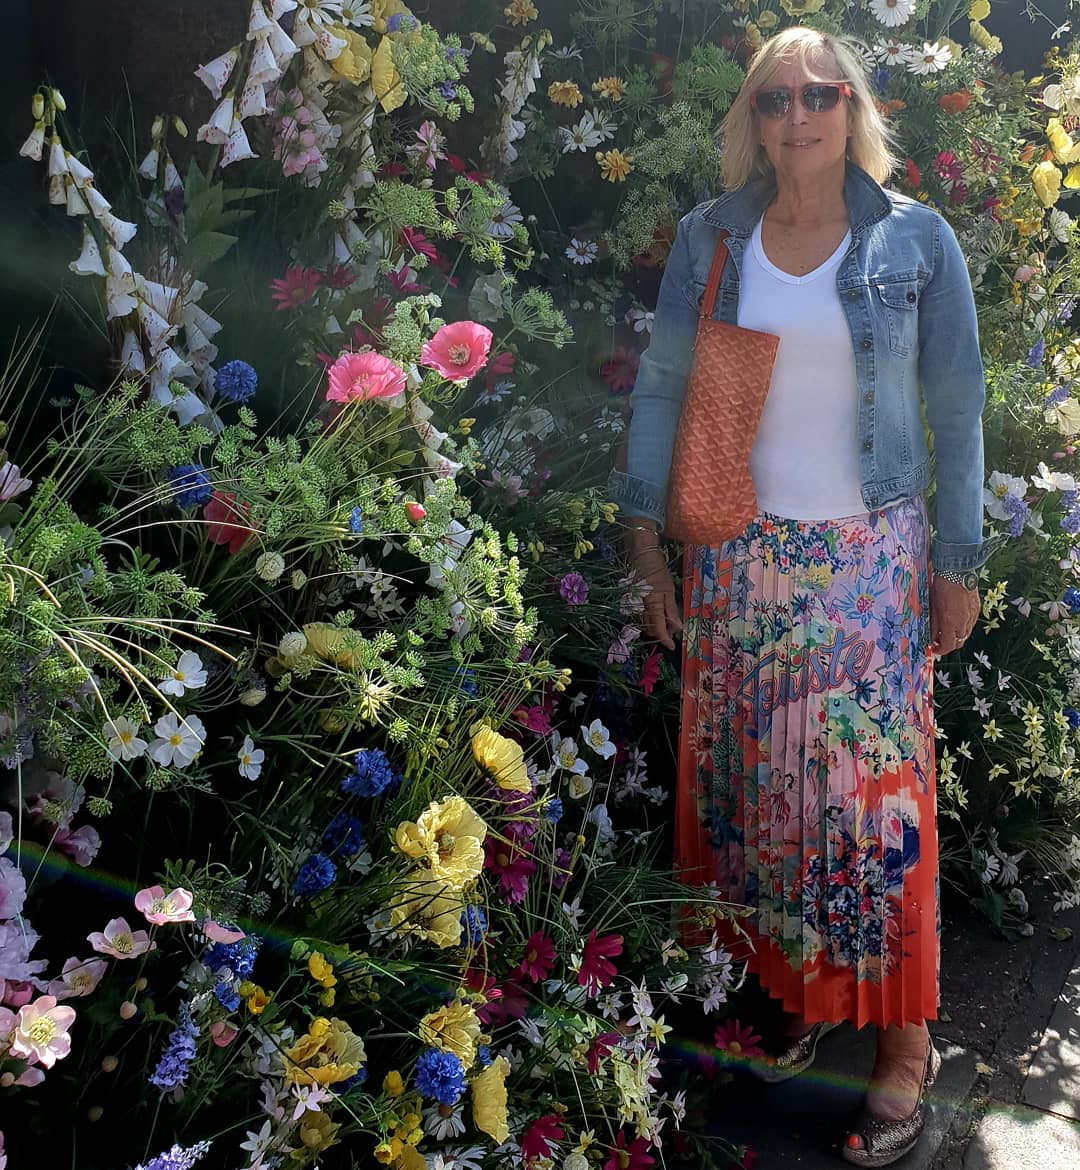 When you want to blend into the scenery.....
.
What you wear should bring you joy and make you feel good.
Wearing colour does for me..
.
Wearing skirt from @hm
Tshirt from @marksandspencer
Denim jacket vintage
Gold sequin shoes @tkmaxxuk 
Bag @goyardofficial
Sunglasses @tkmaxxuk Maxx.
.
@ivychelsgarden
.
.
.
.
.